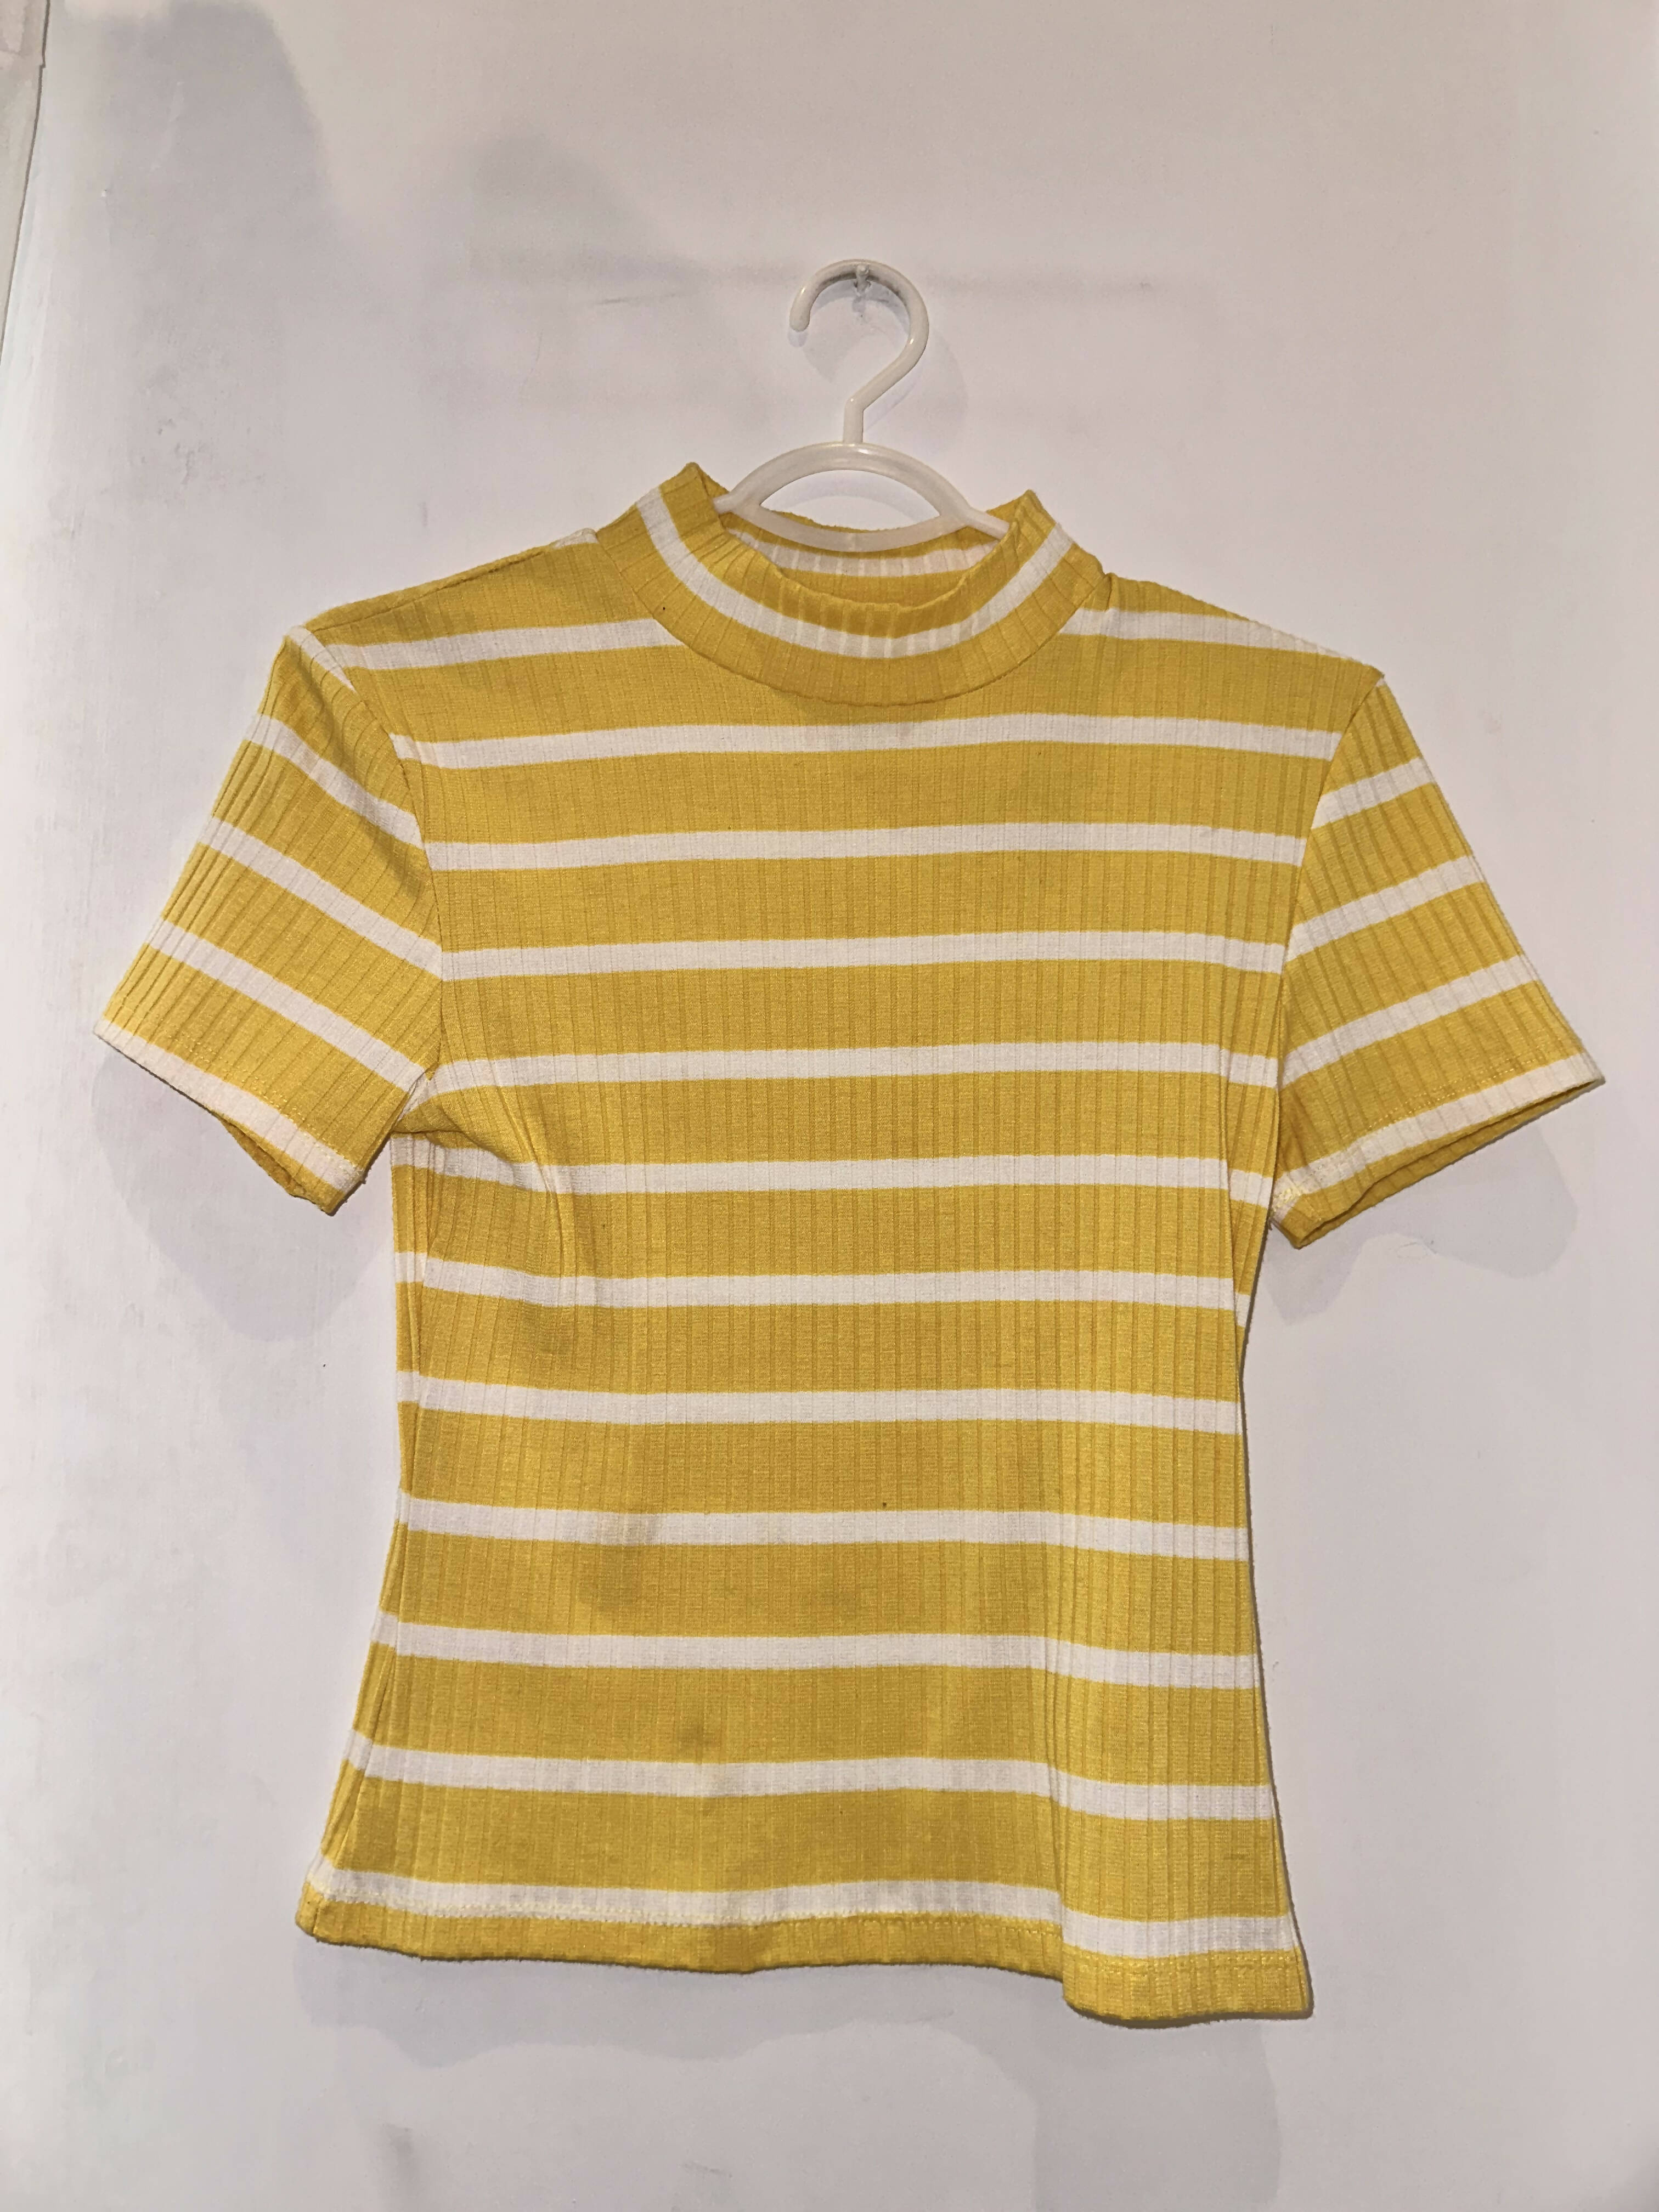 Topshop | Petite UK | Yellow Top | Women Tops & Tshirts | Extra small | Worn Once